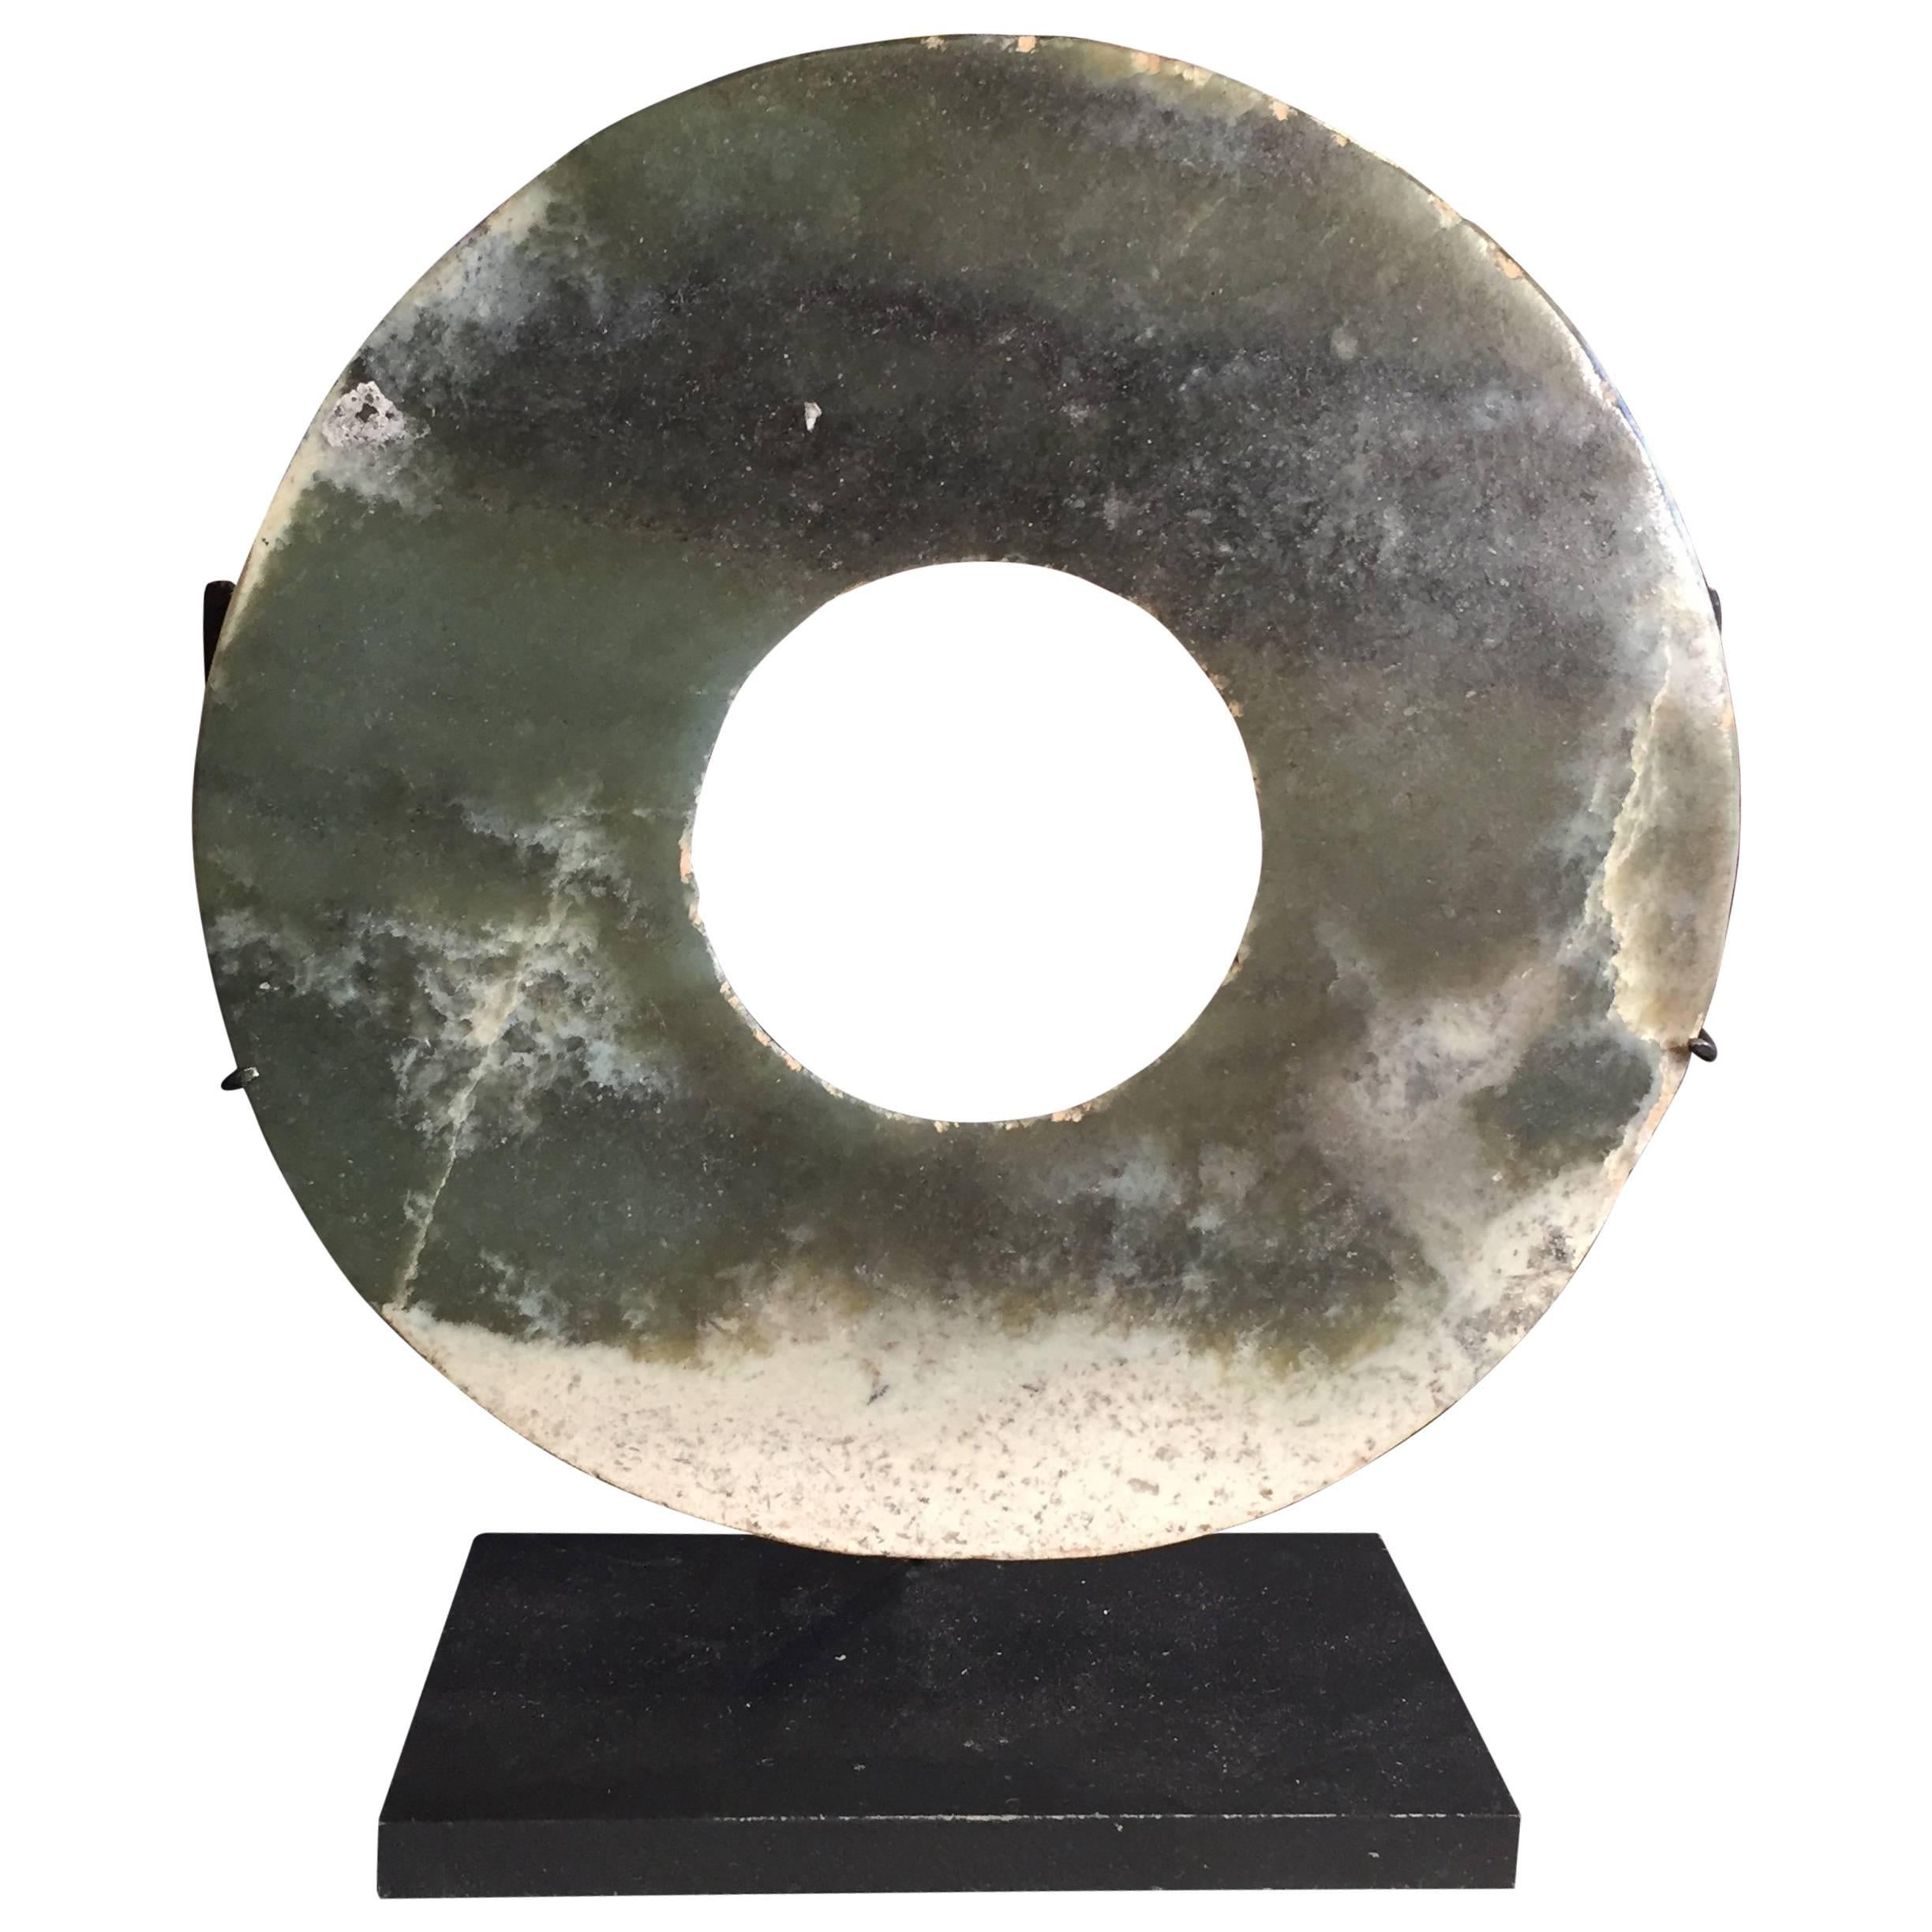 Authentic Jade Bi Disc from Ancient China 4000 Years Old